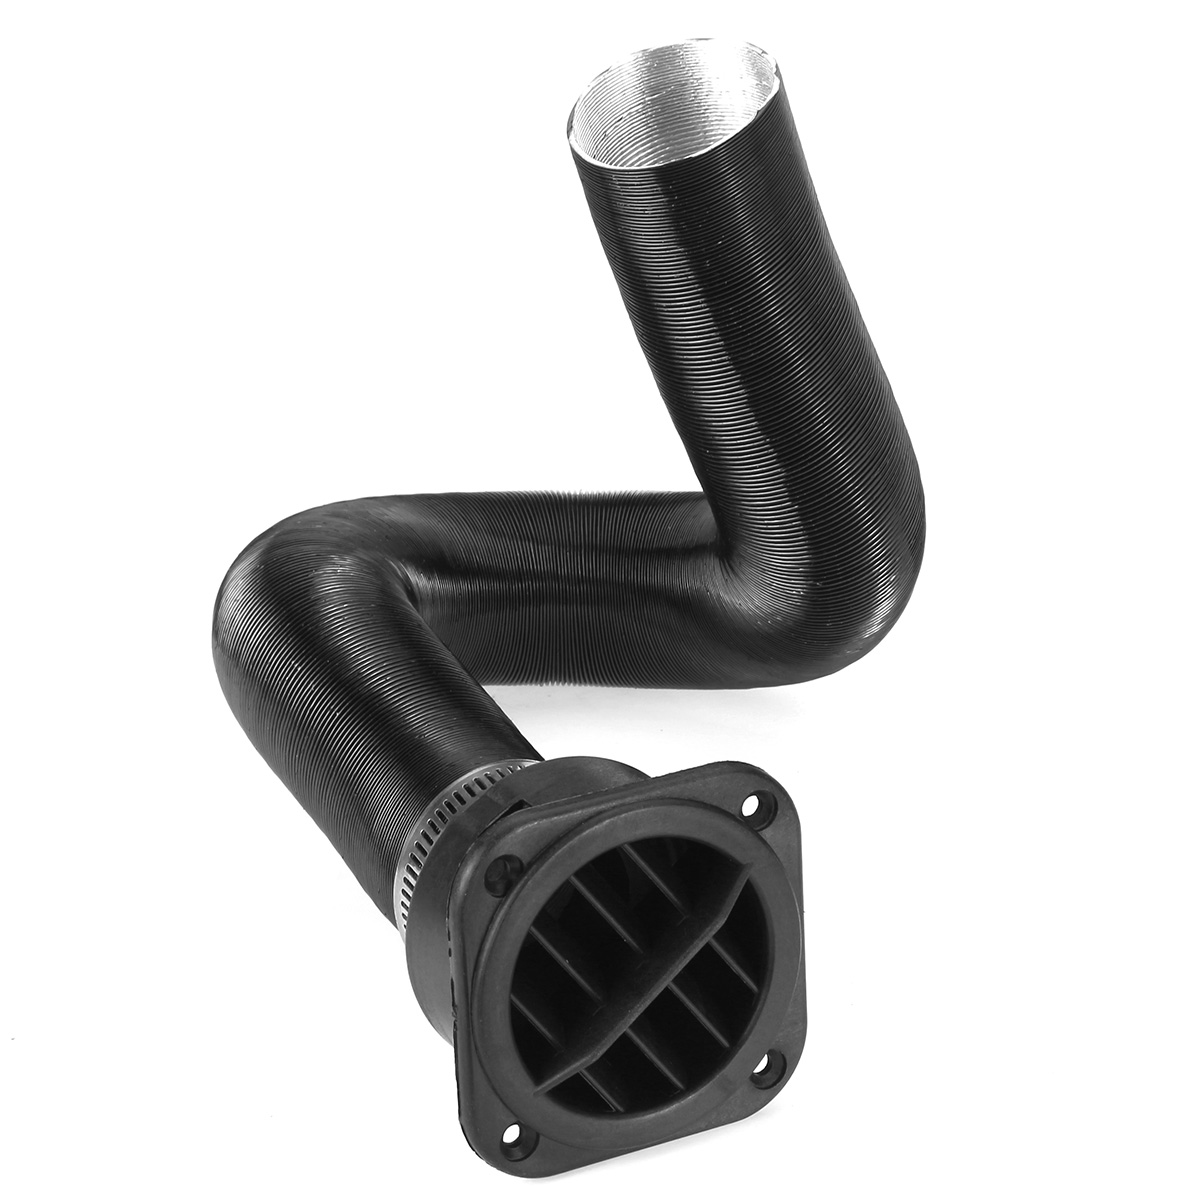 42mm-Tube-Heater-Air-Duct-Pipe-Ducting-Air-Vent-Outlet-For-Air-Diesel-Heater-1737493-5